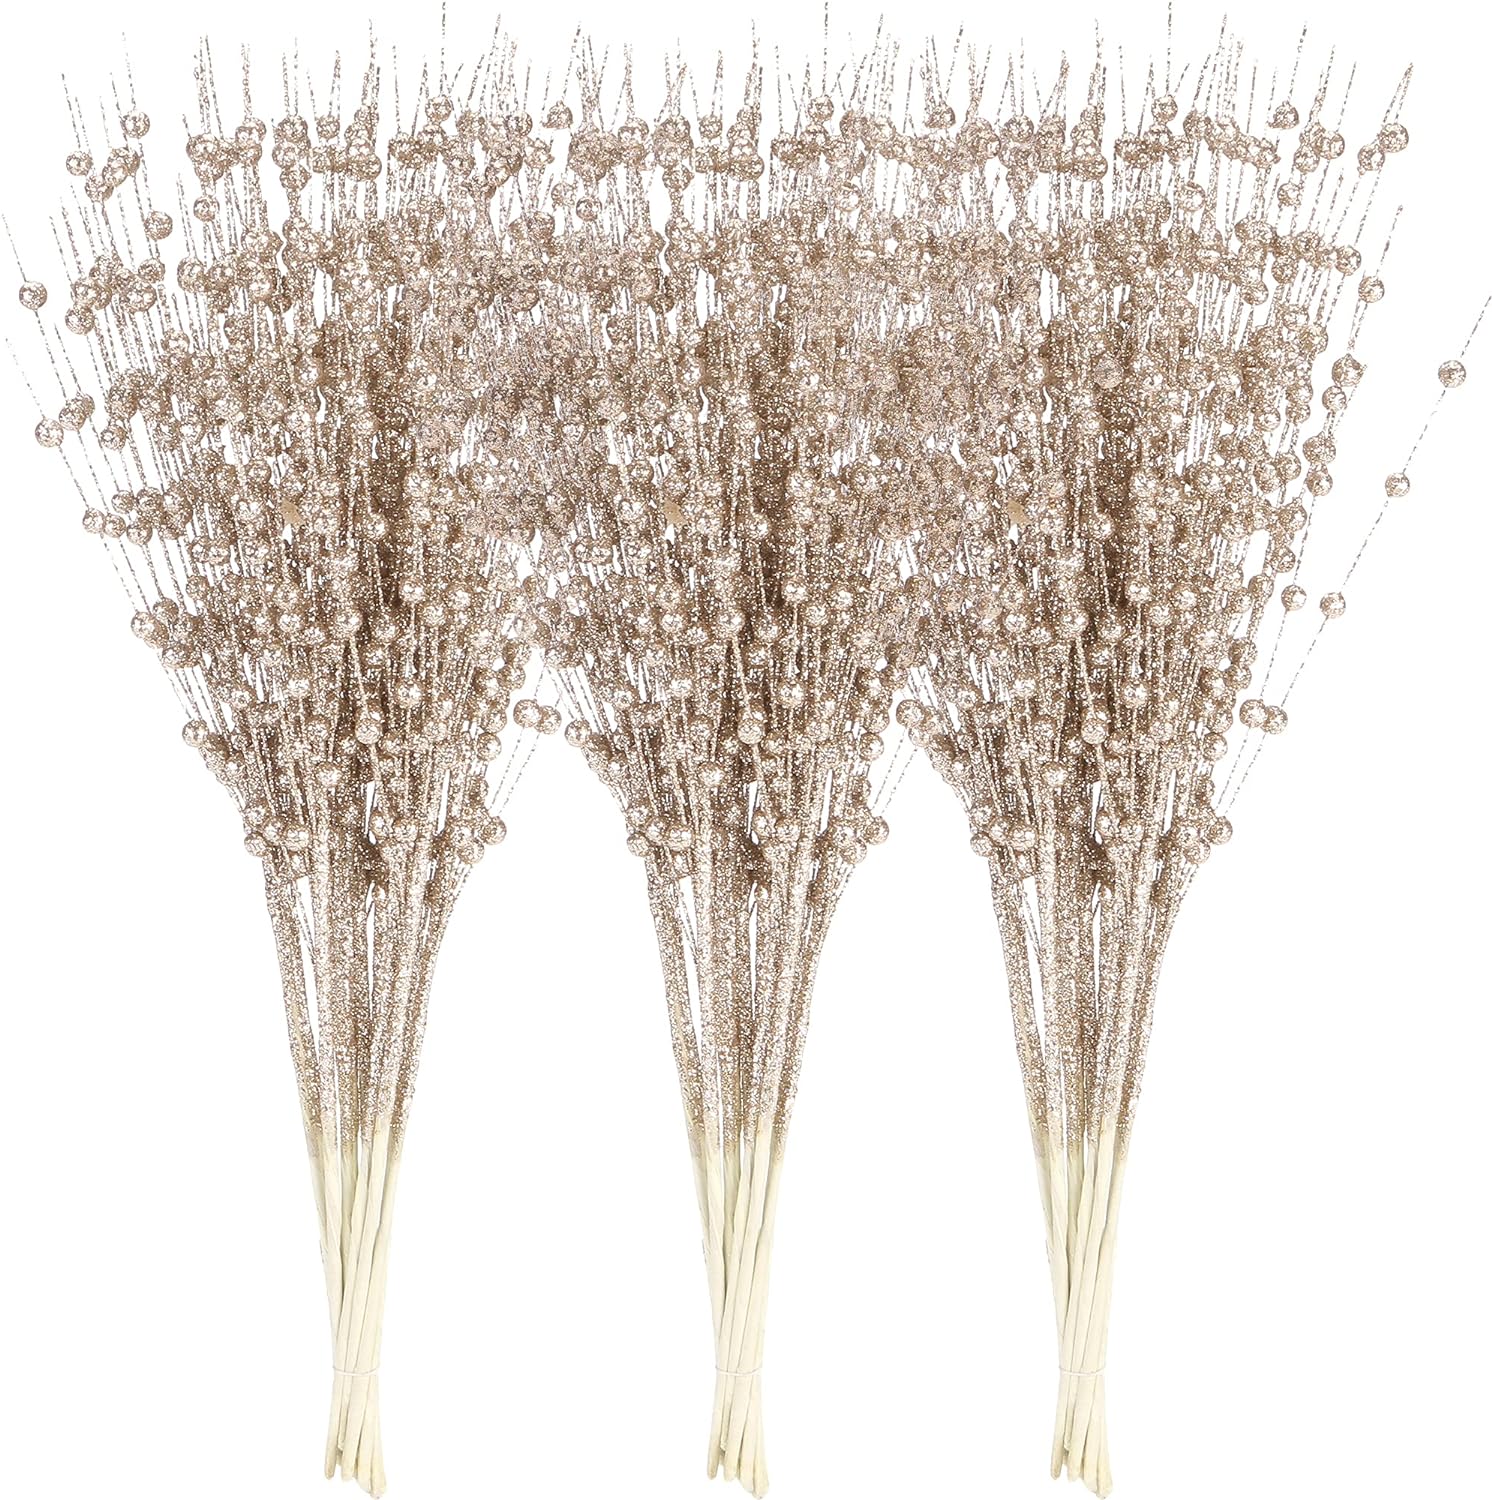 Sea Team 24-Pack Artificial Glitter Berry Stem Ornaments, Decorative Bead Sticks, Glittery Twigs, Picks, Branches for Christmas Tree, Small Vase, Holiday, Wedding, Party (17 Inches, Champagne)